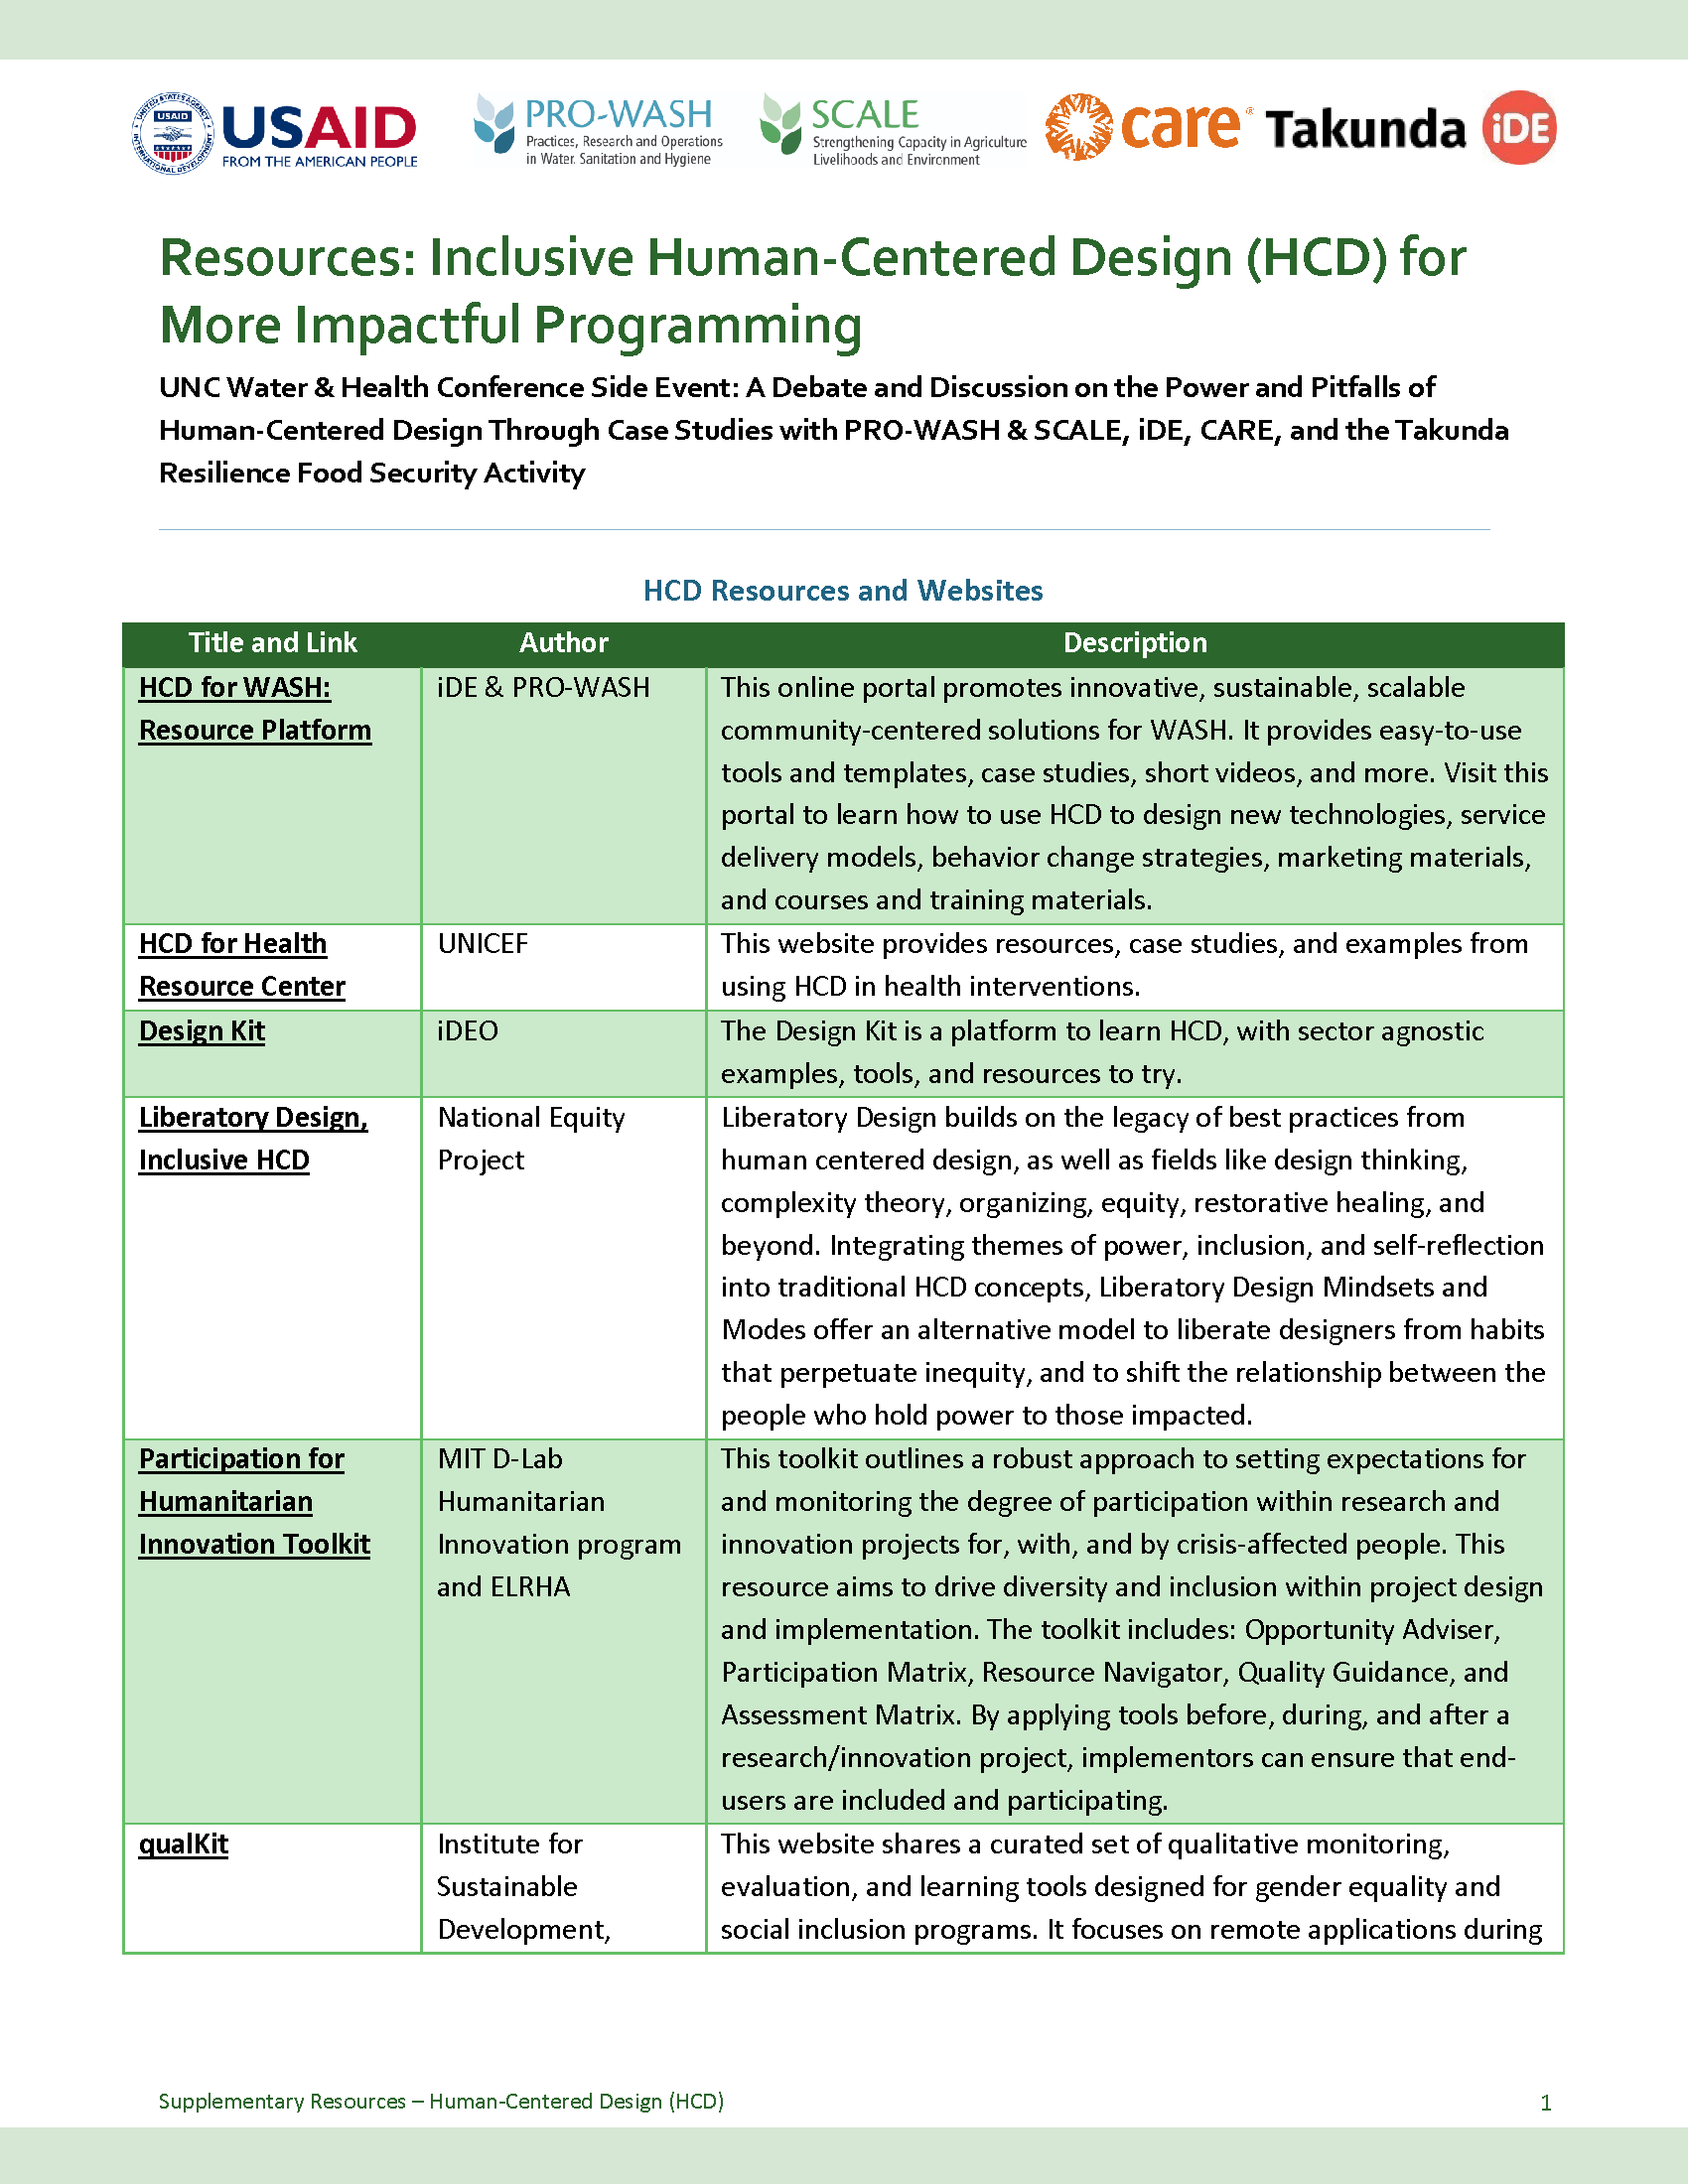 Cover page for Resources: Inclusive Human-Centered Design (HCD) for More Impactful Programming